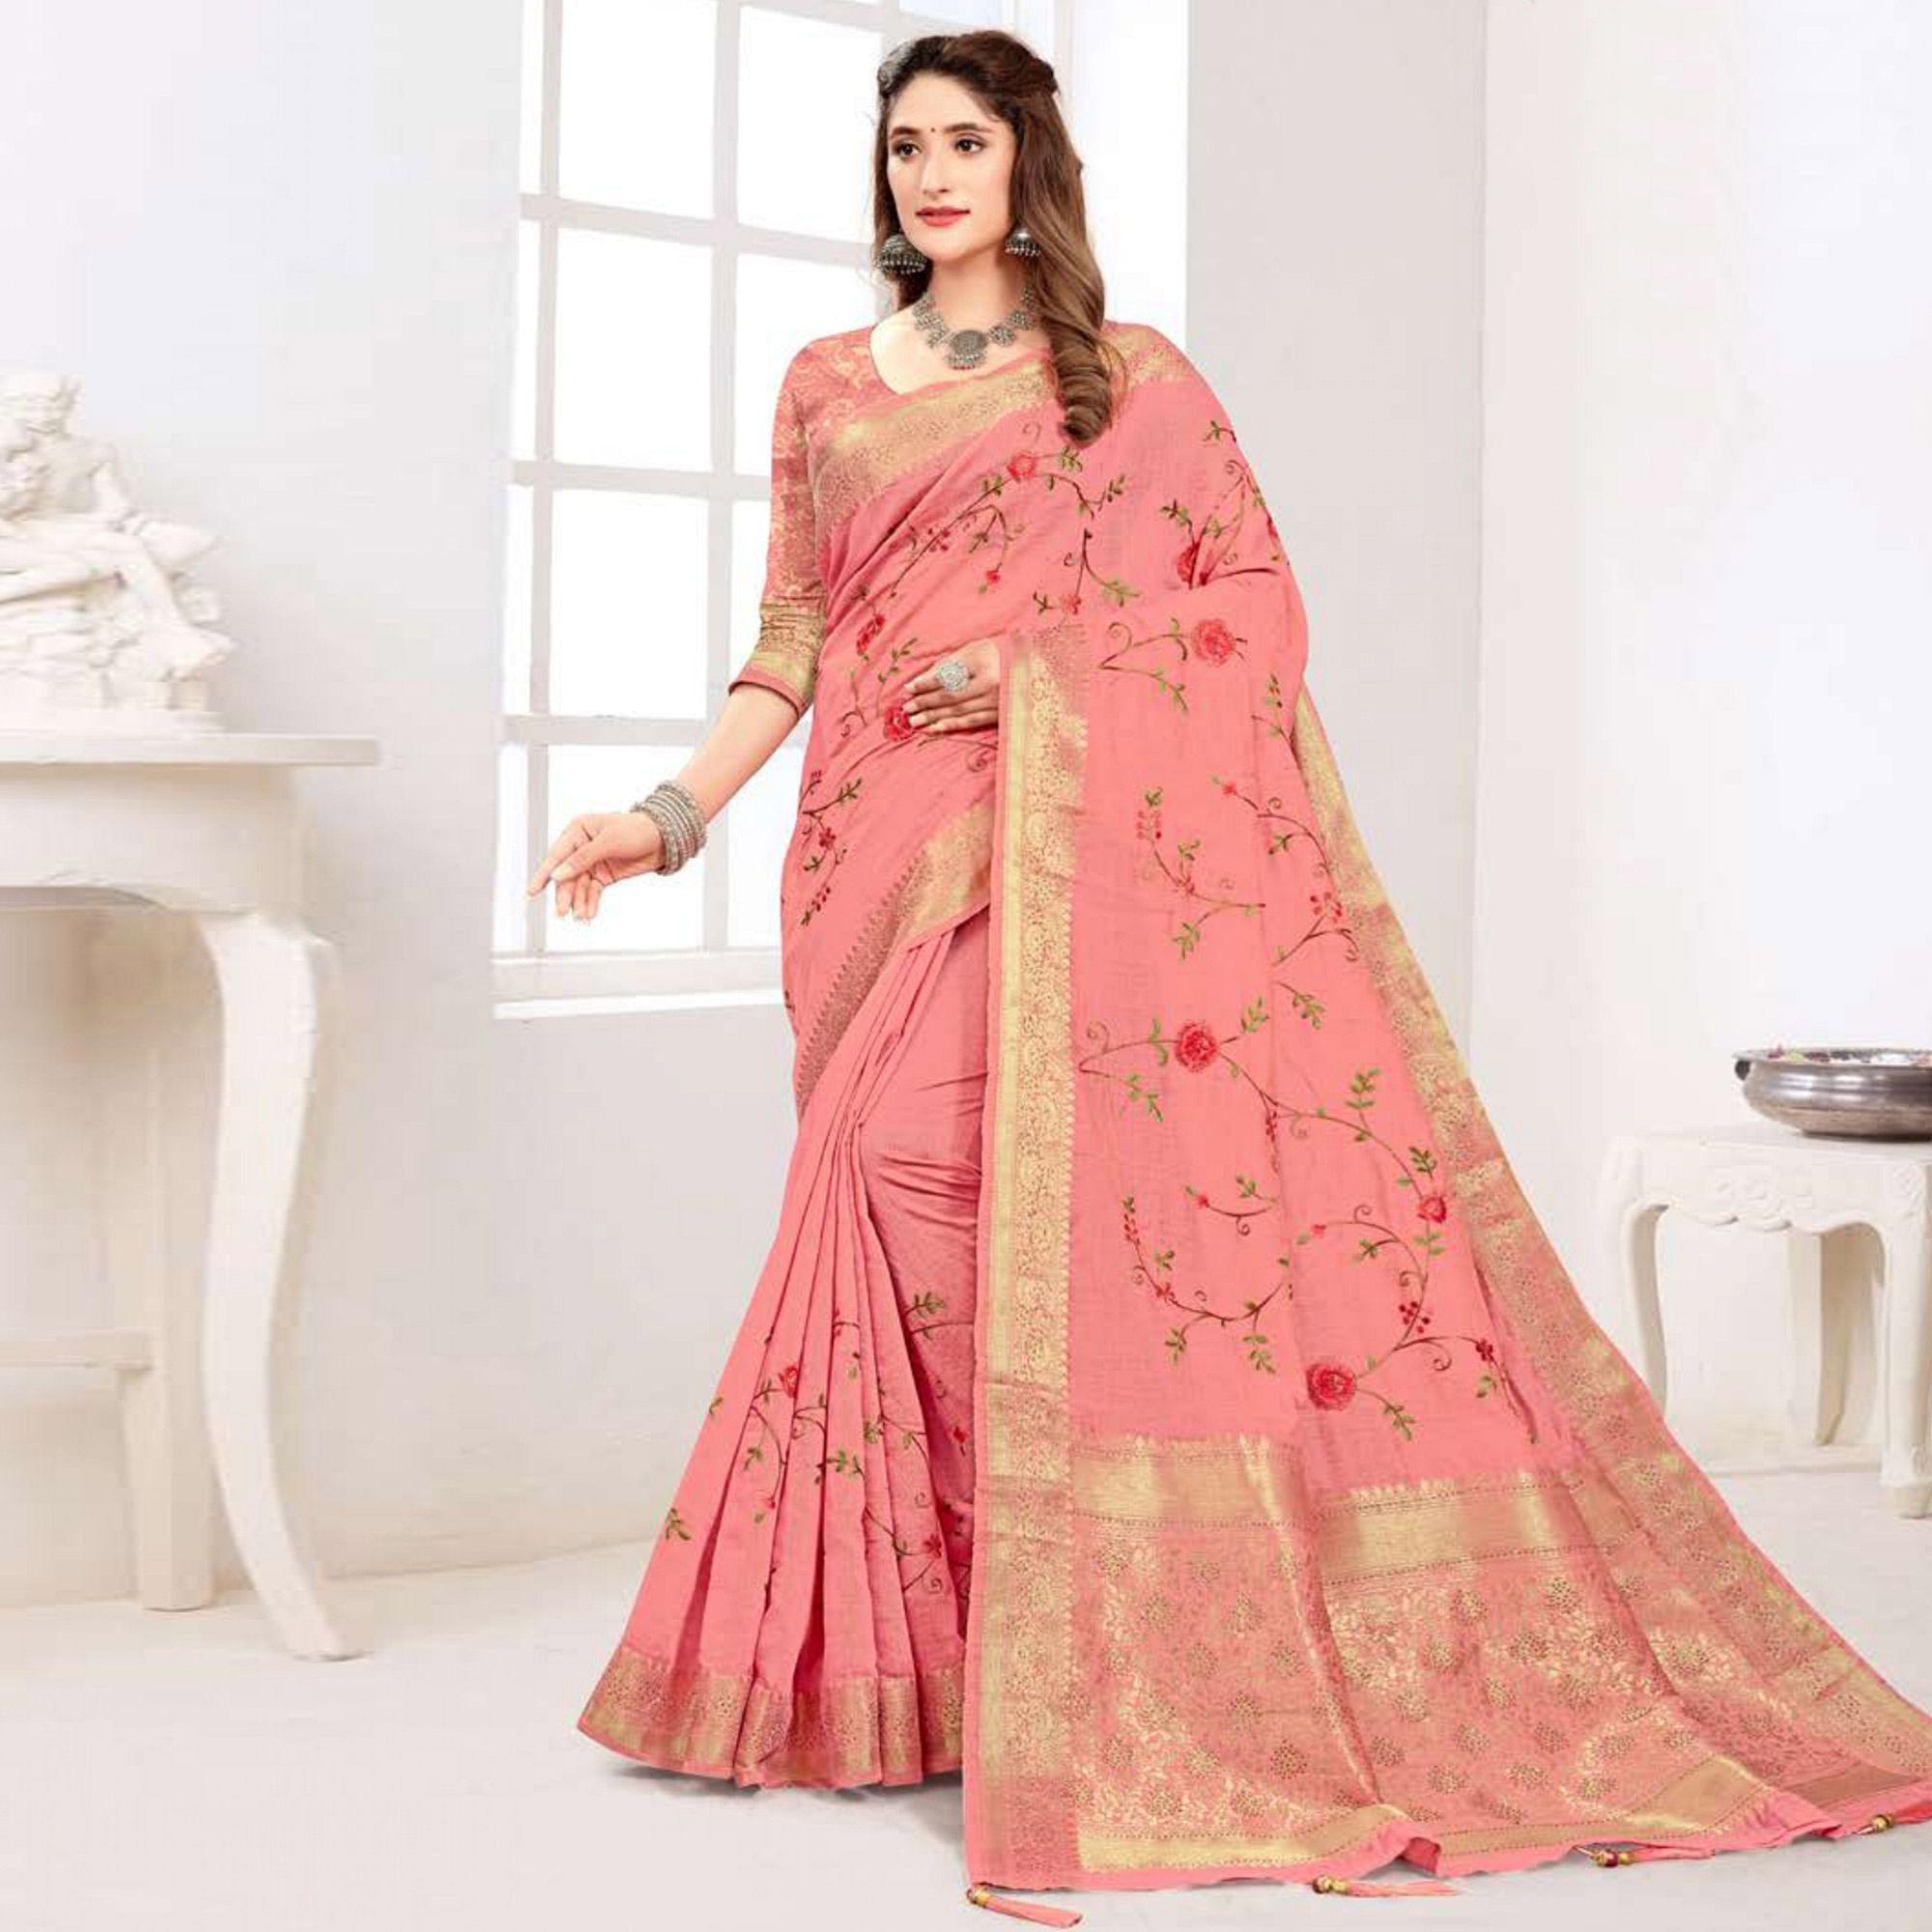 Peach Floral Embroidered Cotton Silk Saree With Tassels - Peachmode